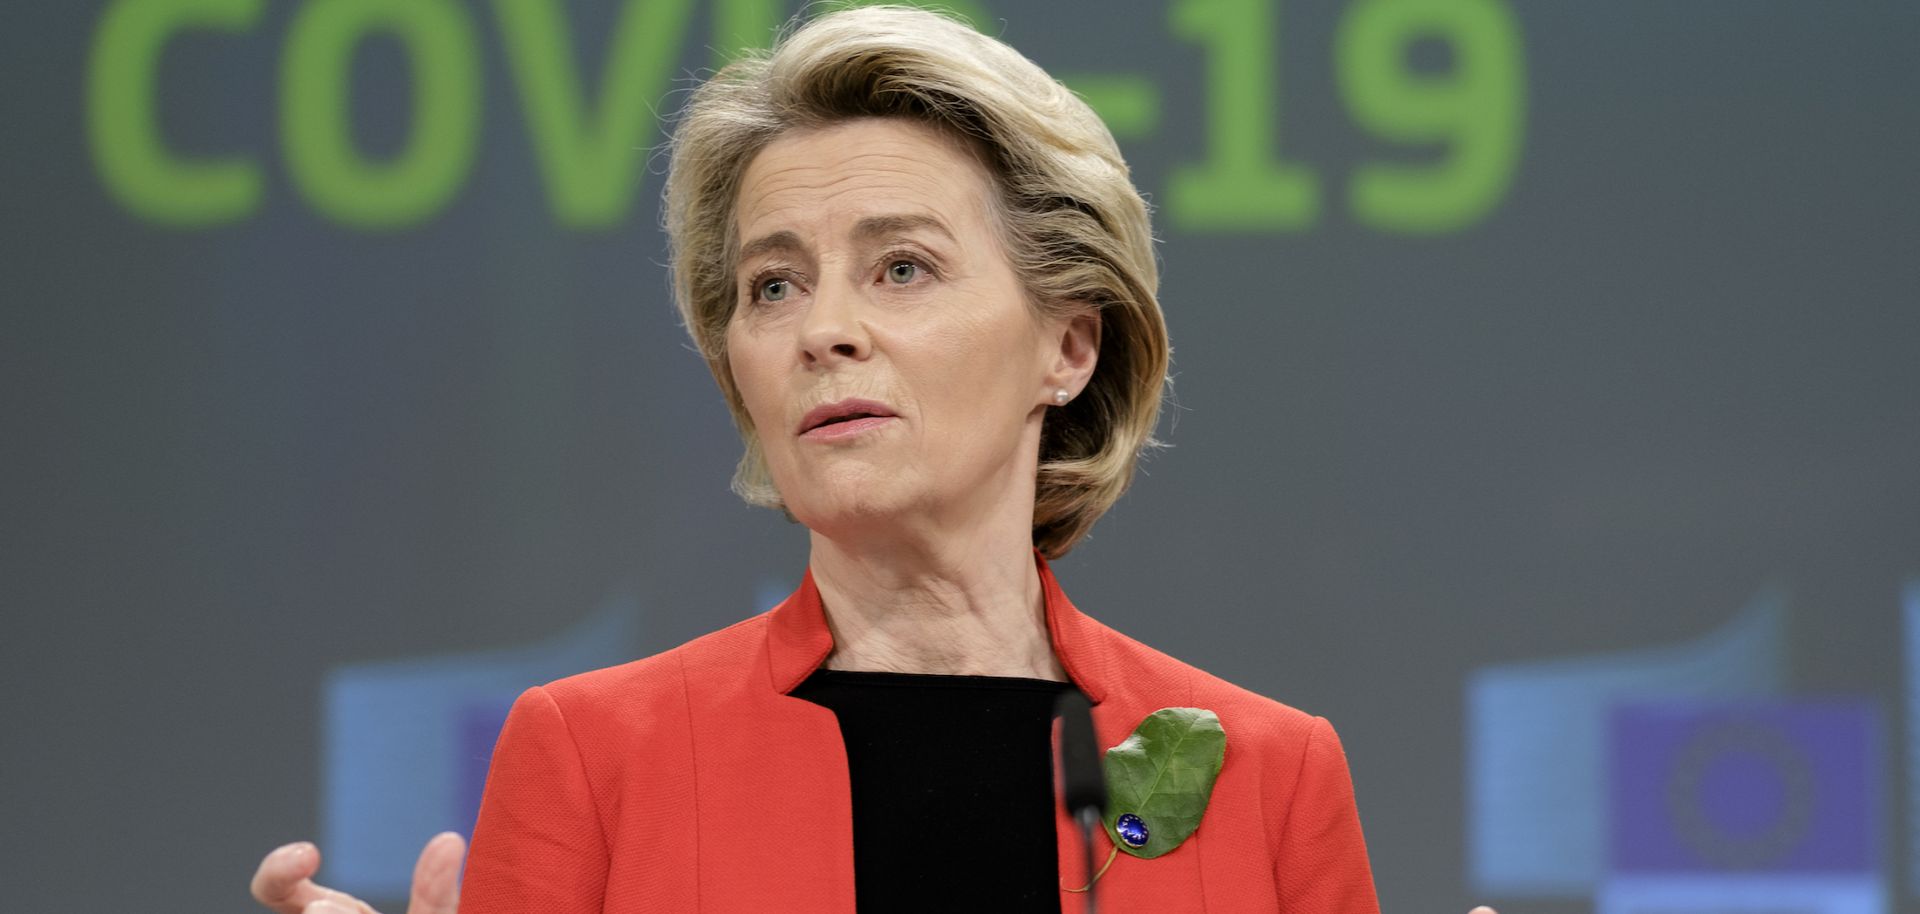 European Commission President Ursula von der Leyen discusses the bloc’s proposed Digital Green Certificate during a press conference on March 17, 2021. 